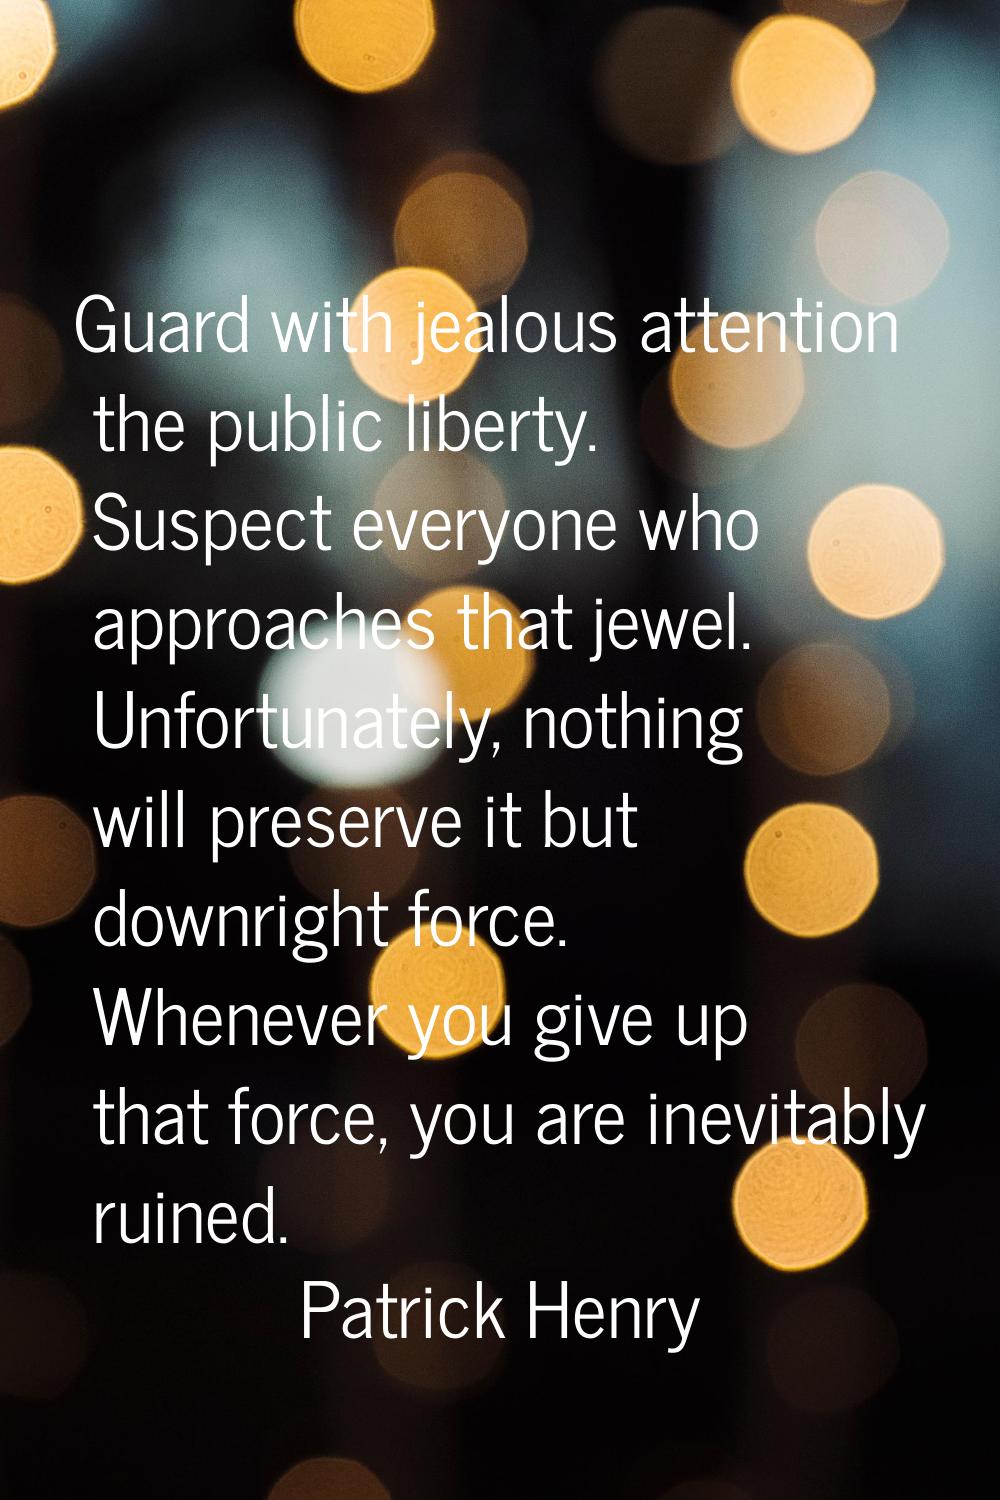 Guard with jealous attention the public liberty. Suspect everyone who approaches that jewel. Unfort